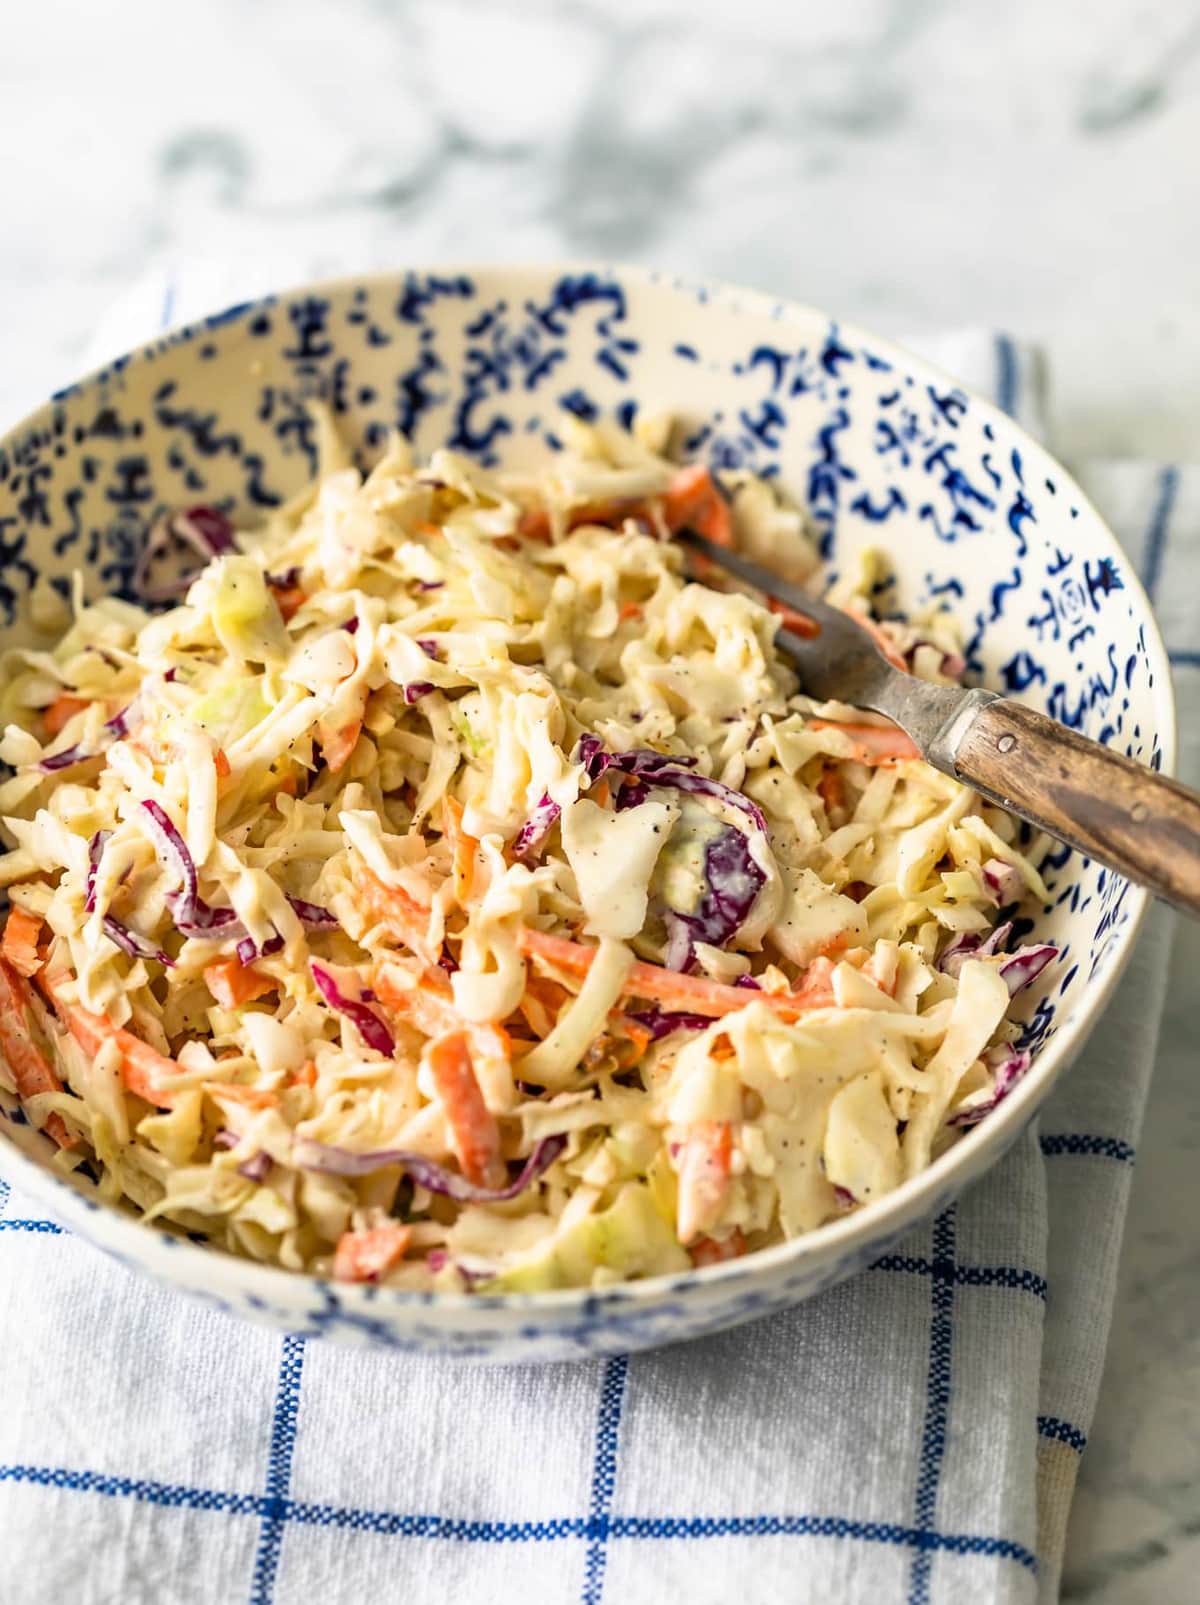 A bowl of food on a plate, with Coleslaw